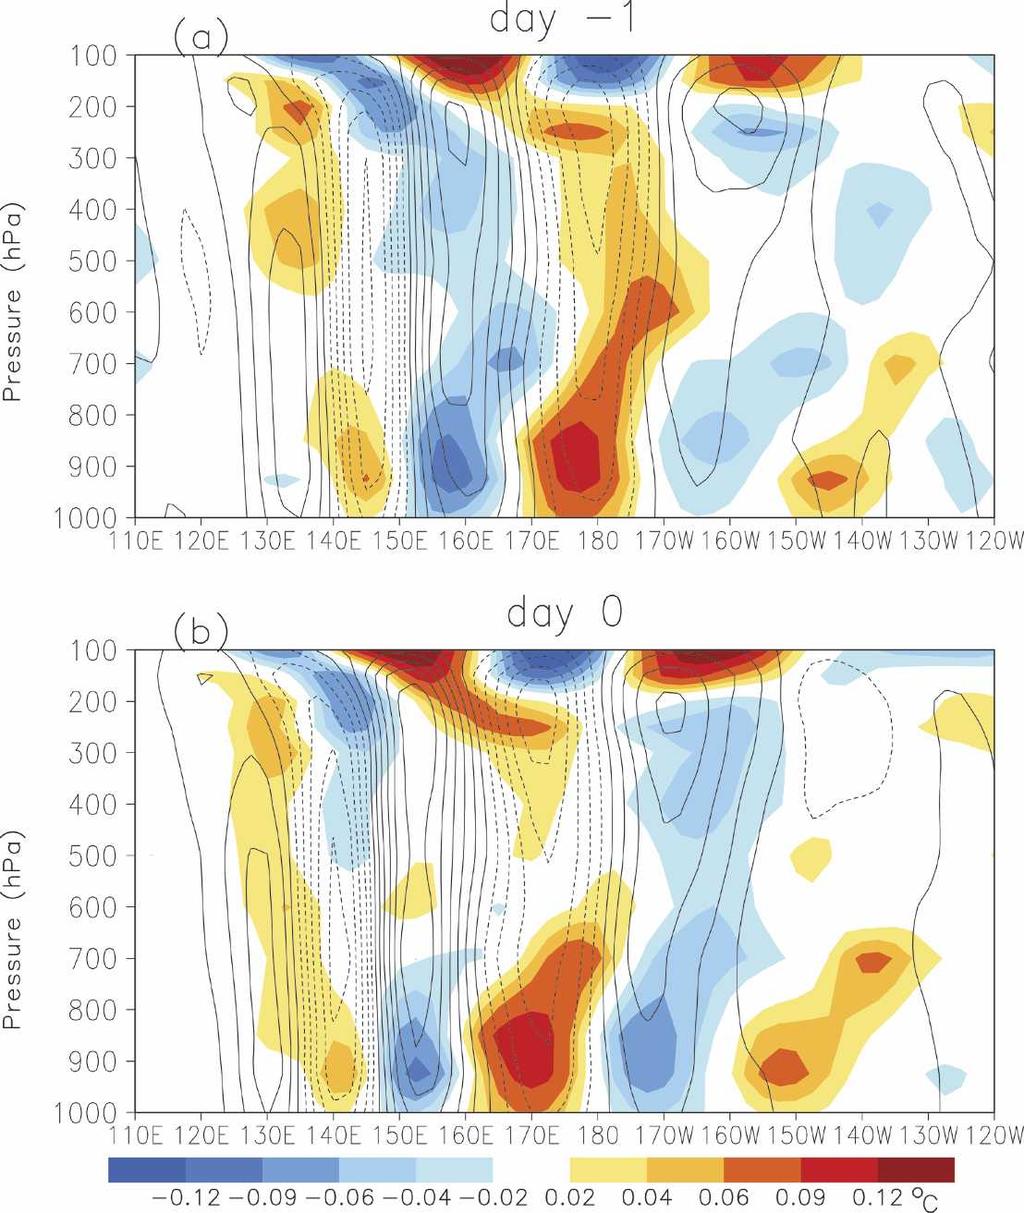 Values of regression coefficients are averaged over the latitude band of 15 25 N. On day 1 (Fig. 6a), there is a strong positive vorticity anomaly at the upper level located at 160 W.